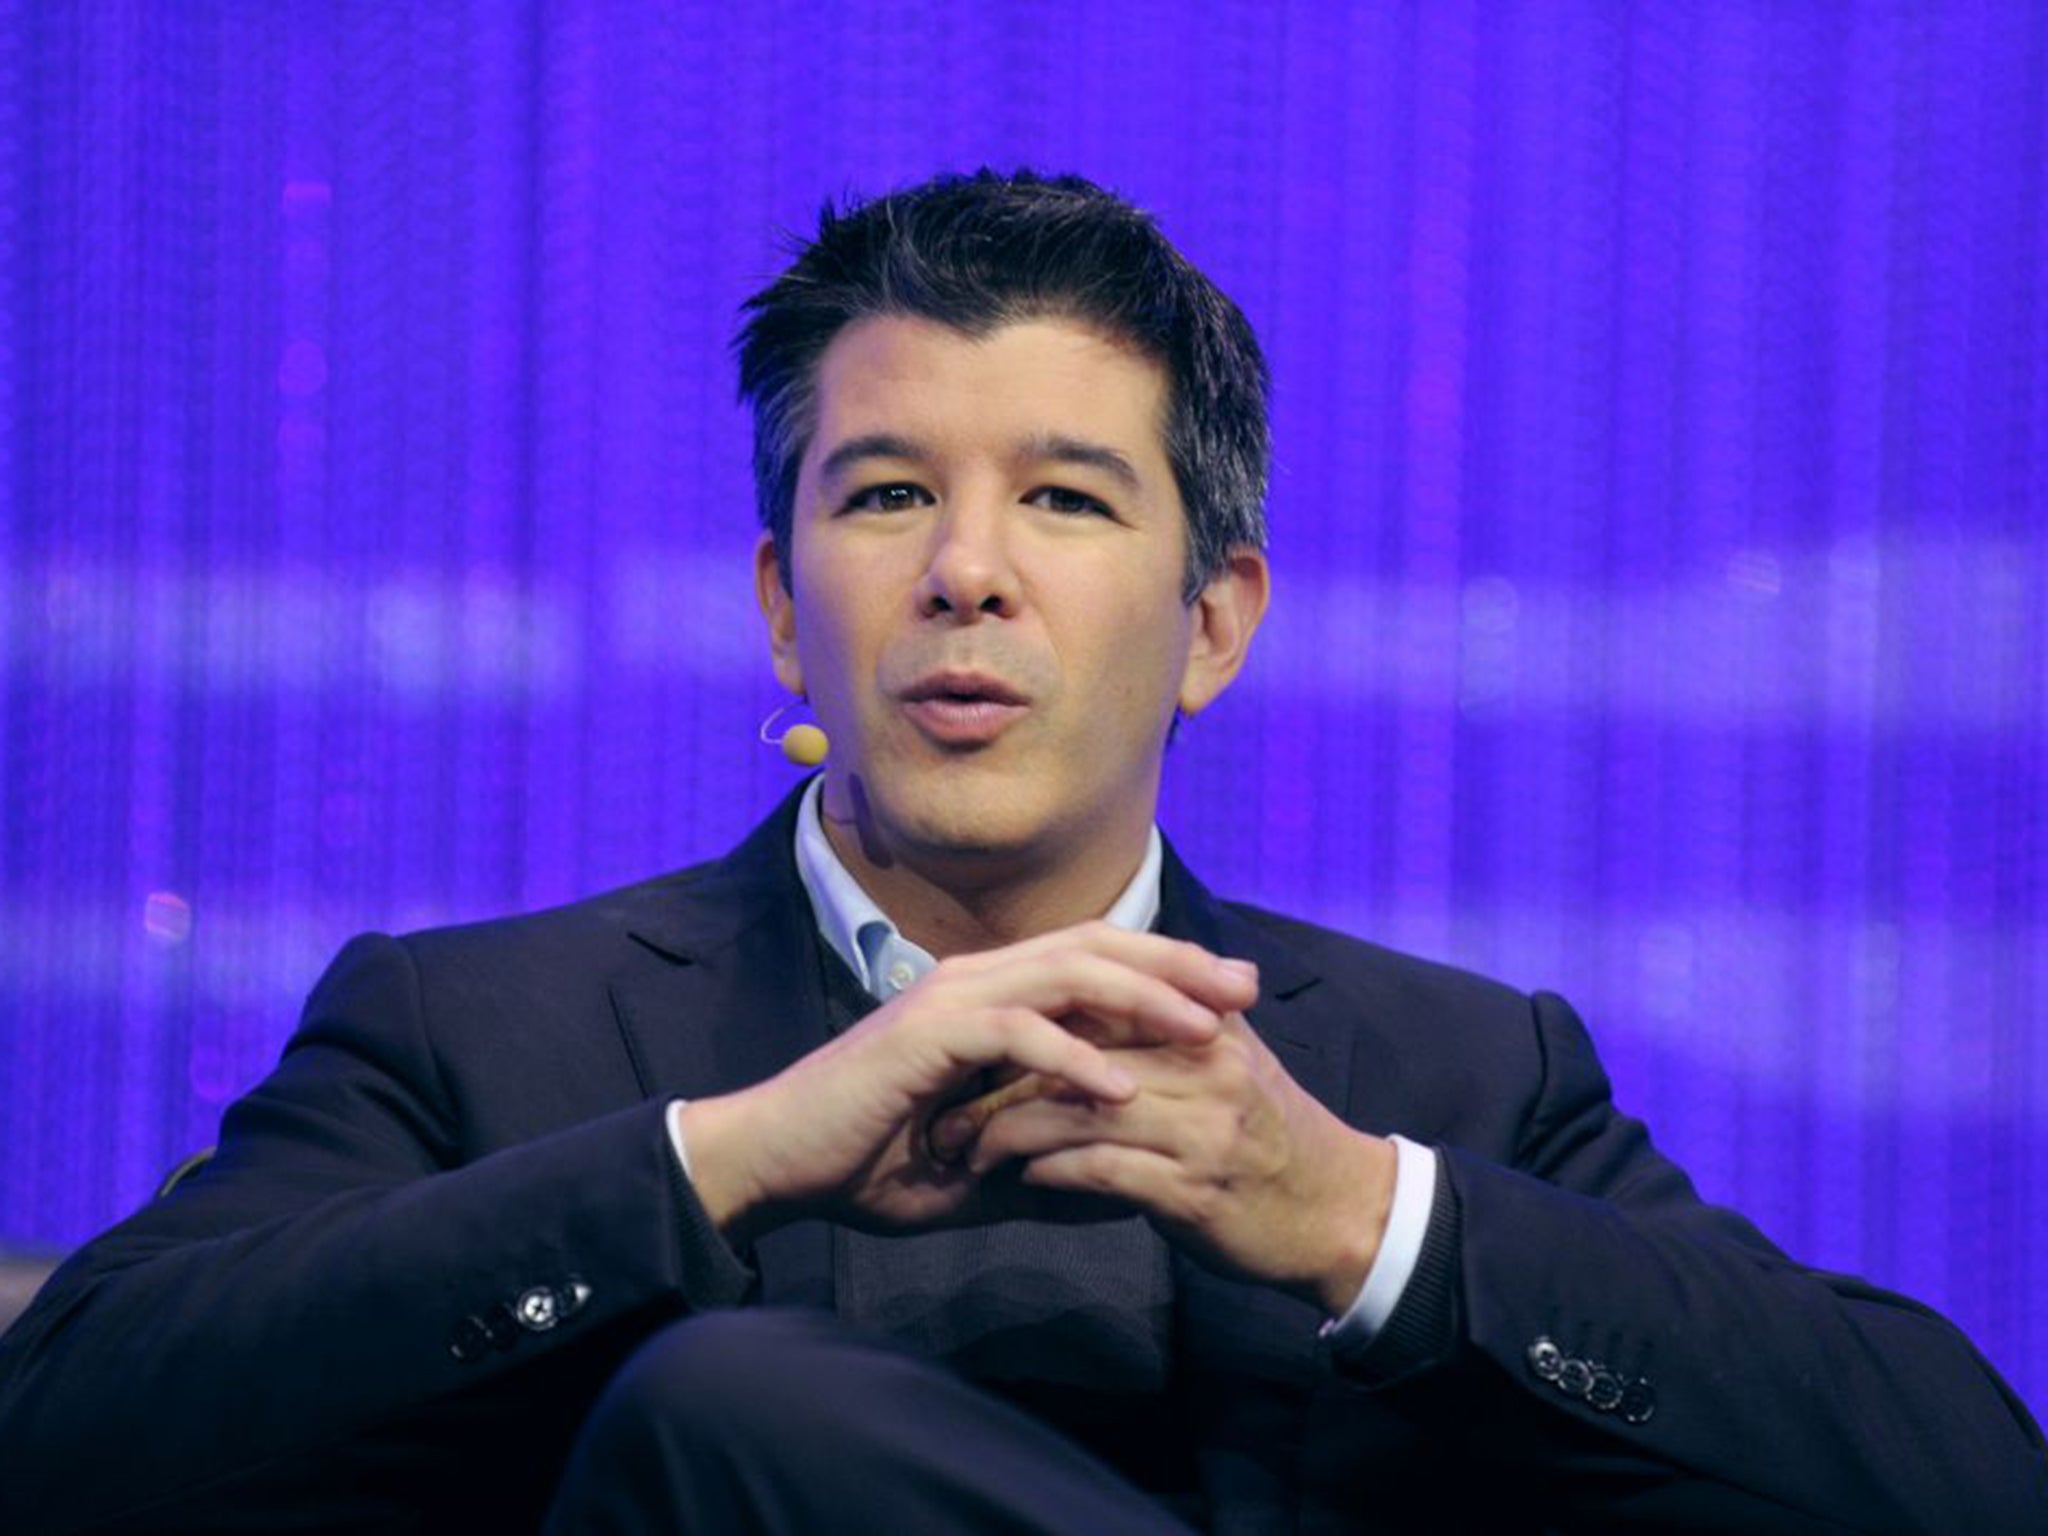 Travis Kalanick, the co-founder of Uber, is now worth $5.3bn